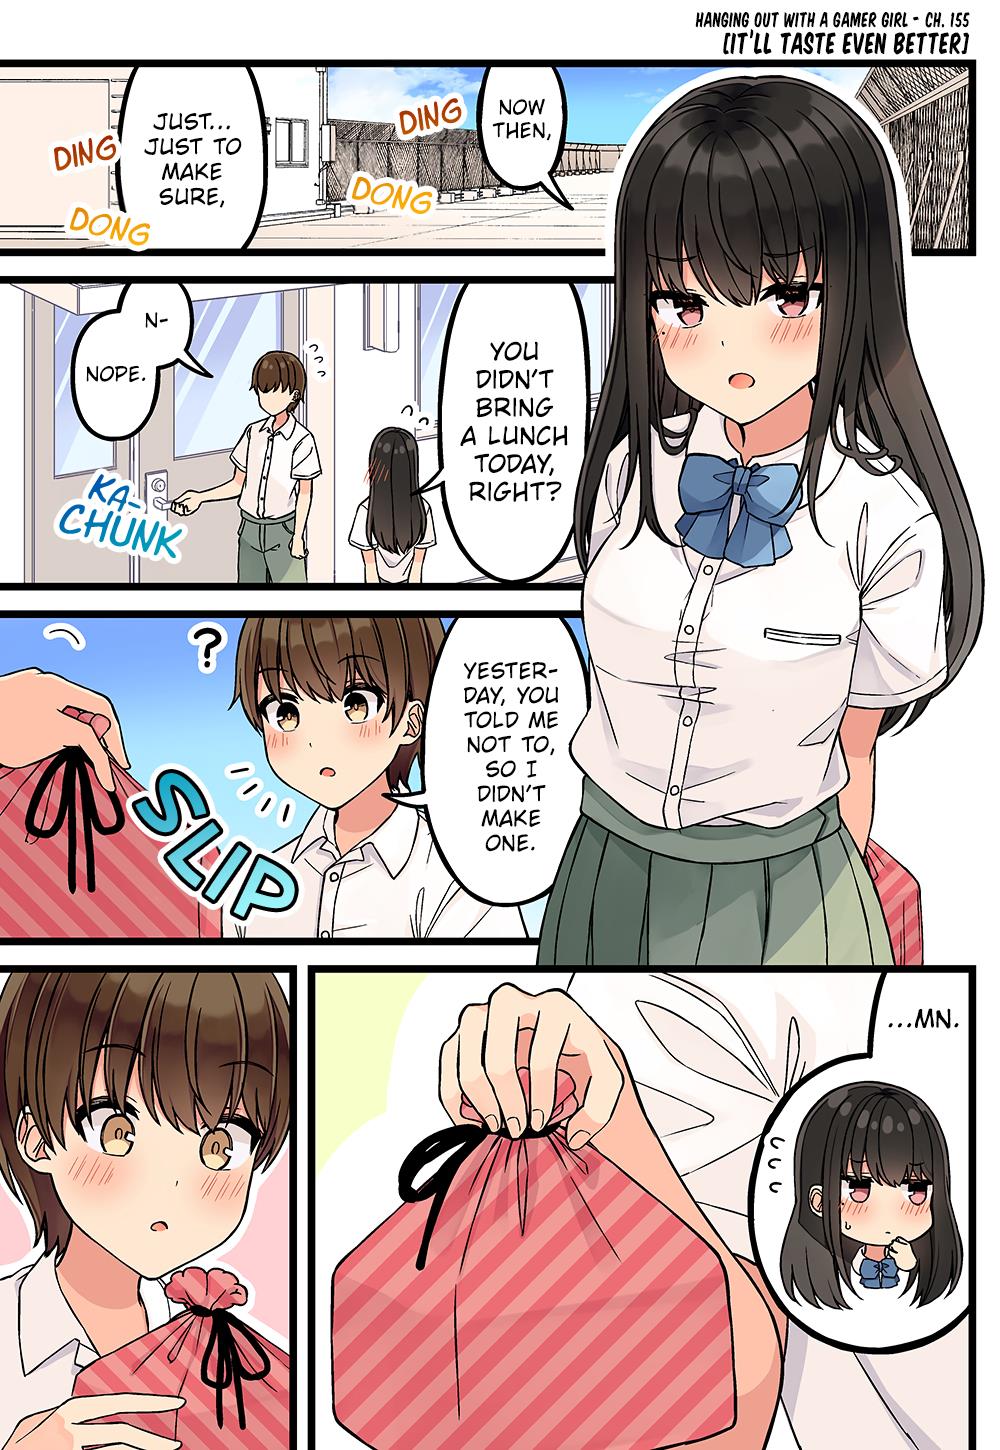 Hanging Out With A Gamer Girl Chapter 155 #1